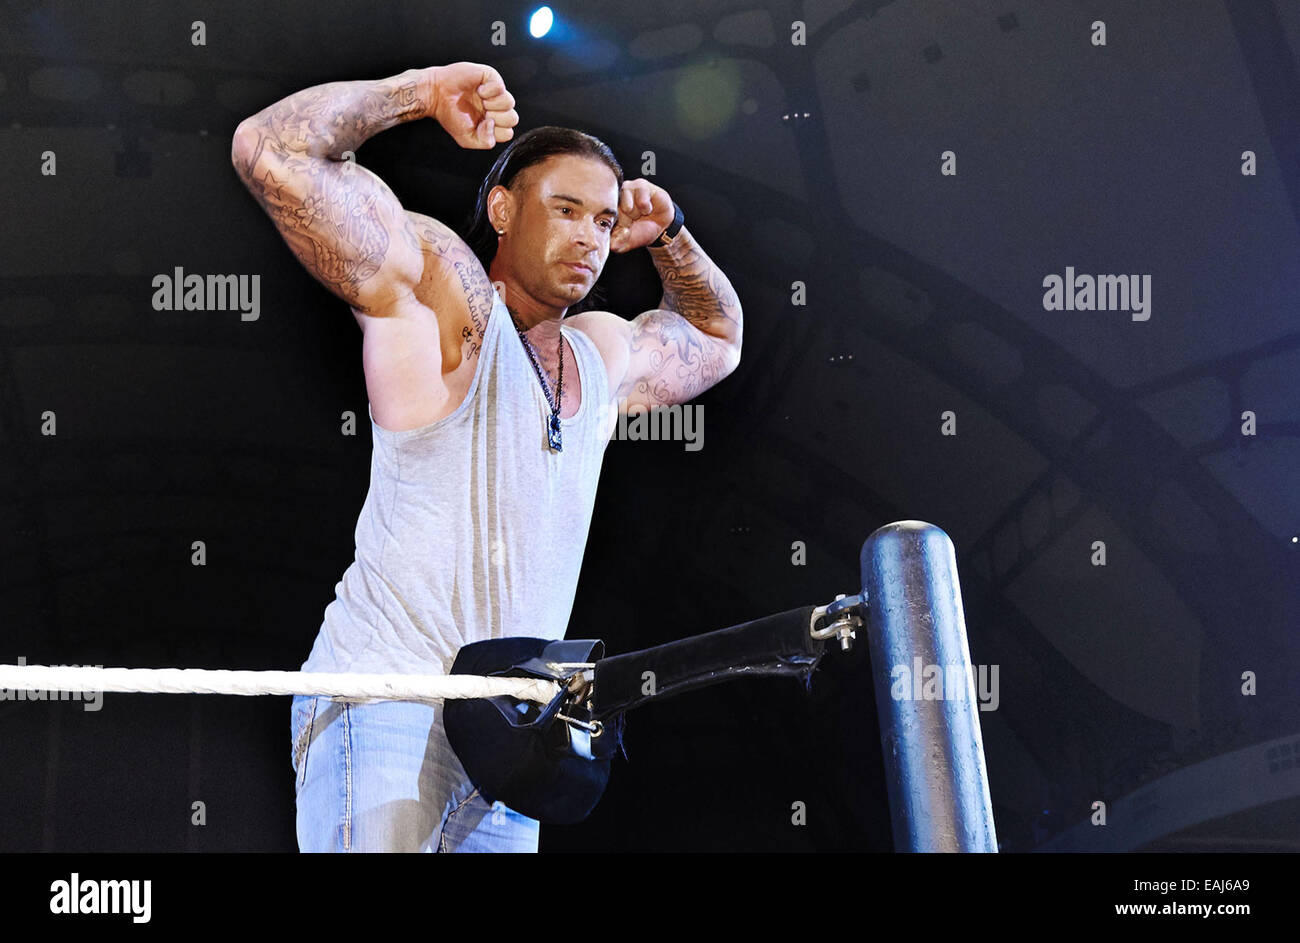 lægemidlet inch damper HANDOUT - Former national goal keeper Tim Wiese poses during a wrestling  event in Frankfurt/Main, Germany, 15 November 2014. Photo: Affonso Gavinha/ WWE (ATTENTION: IMAGE FOR EDITORIAL USE ONLY BY MENTIONTIONING THE SOURCE: